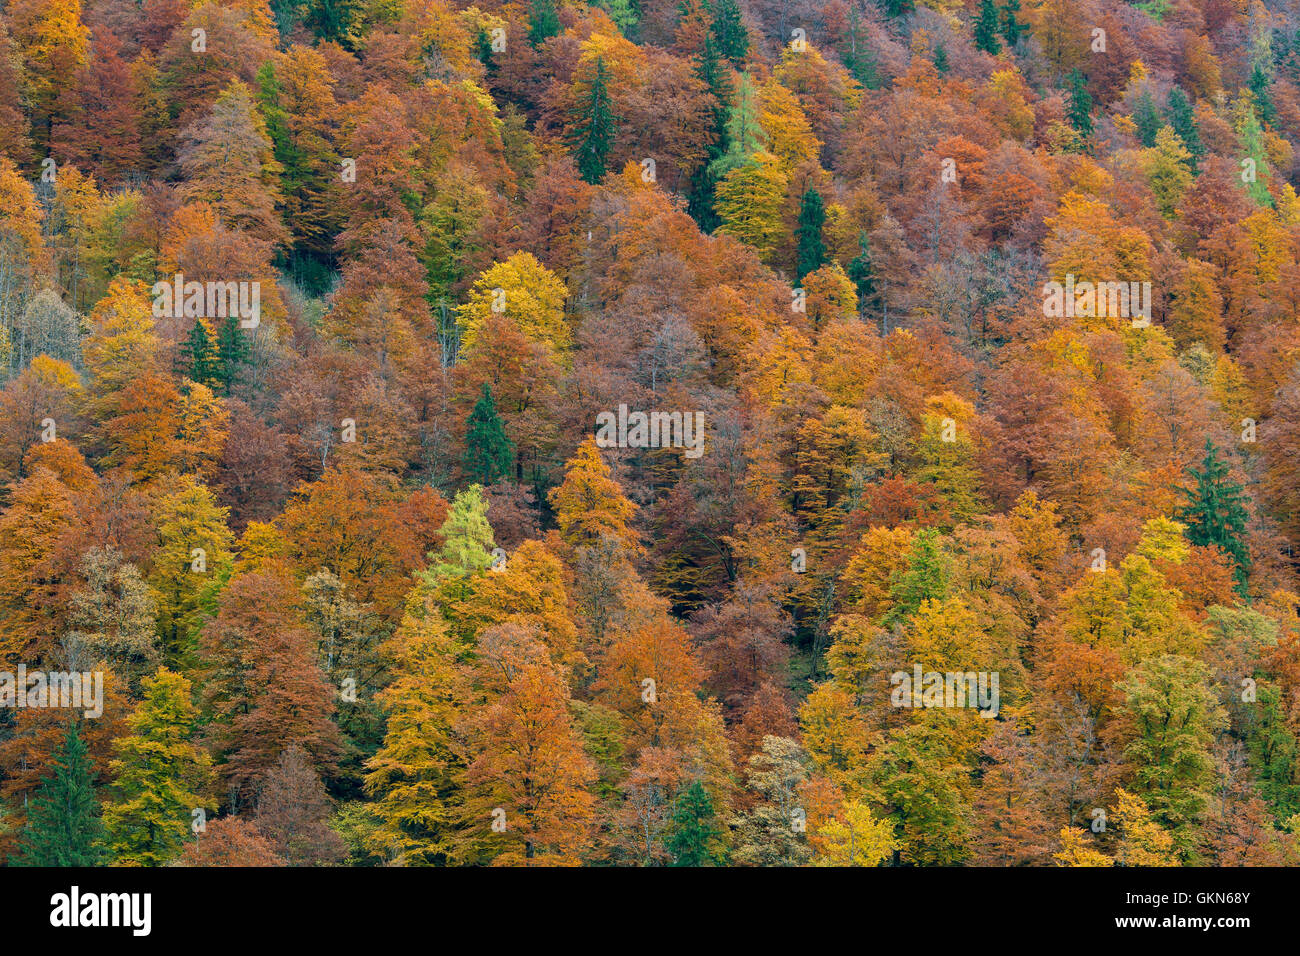 Mixed forest showing foliage of deciduous trees in colourful autumn colours Stock Photo